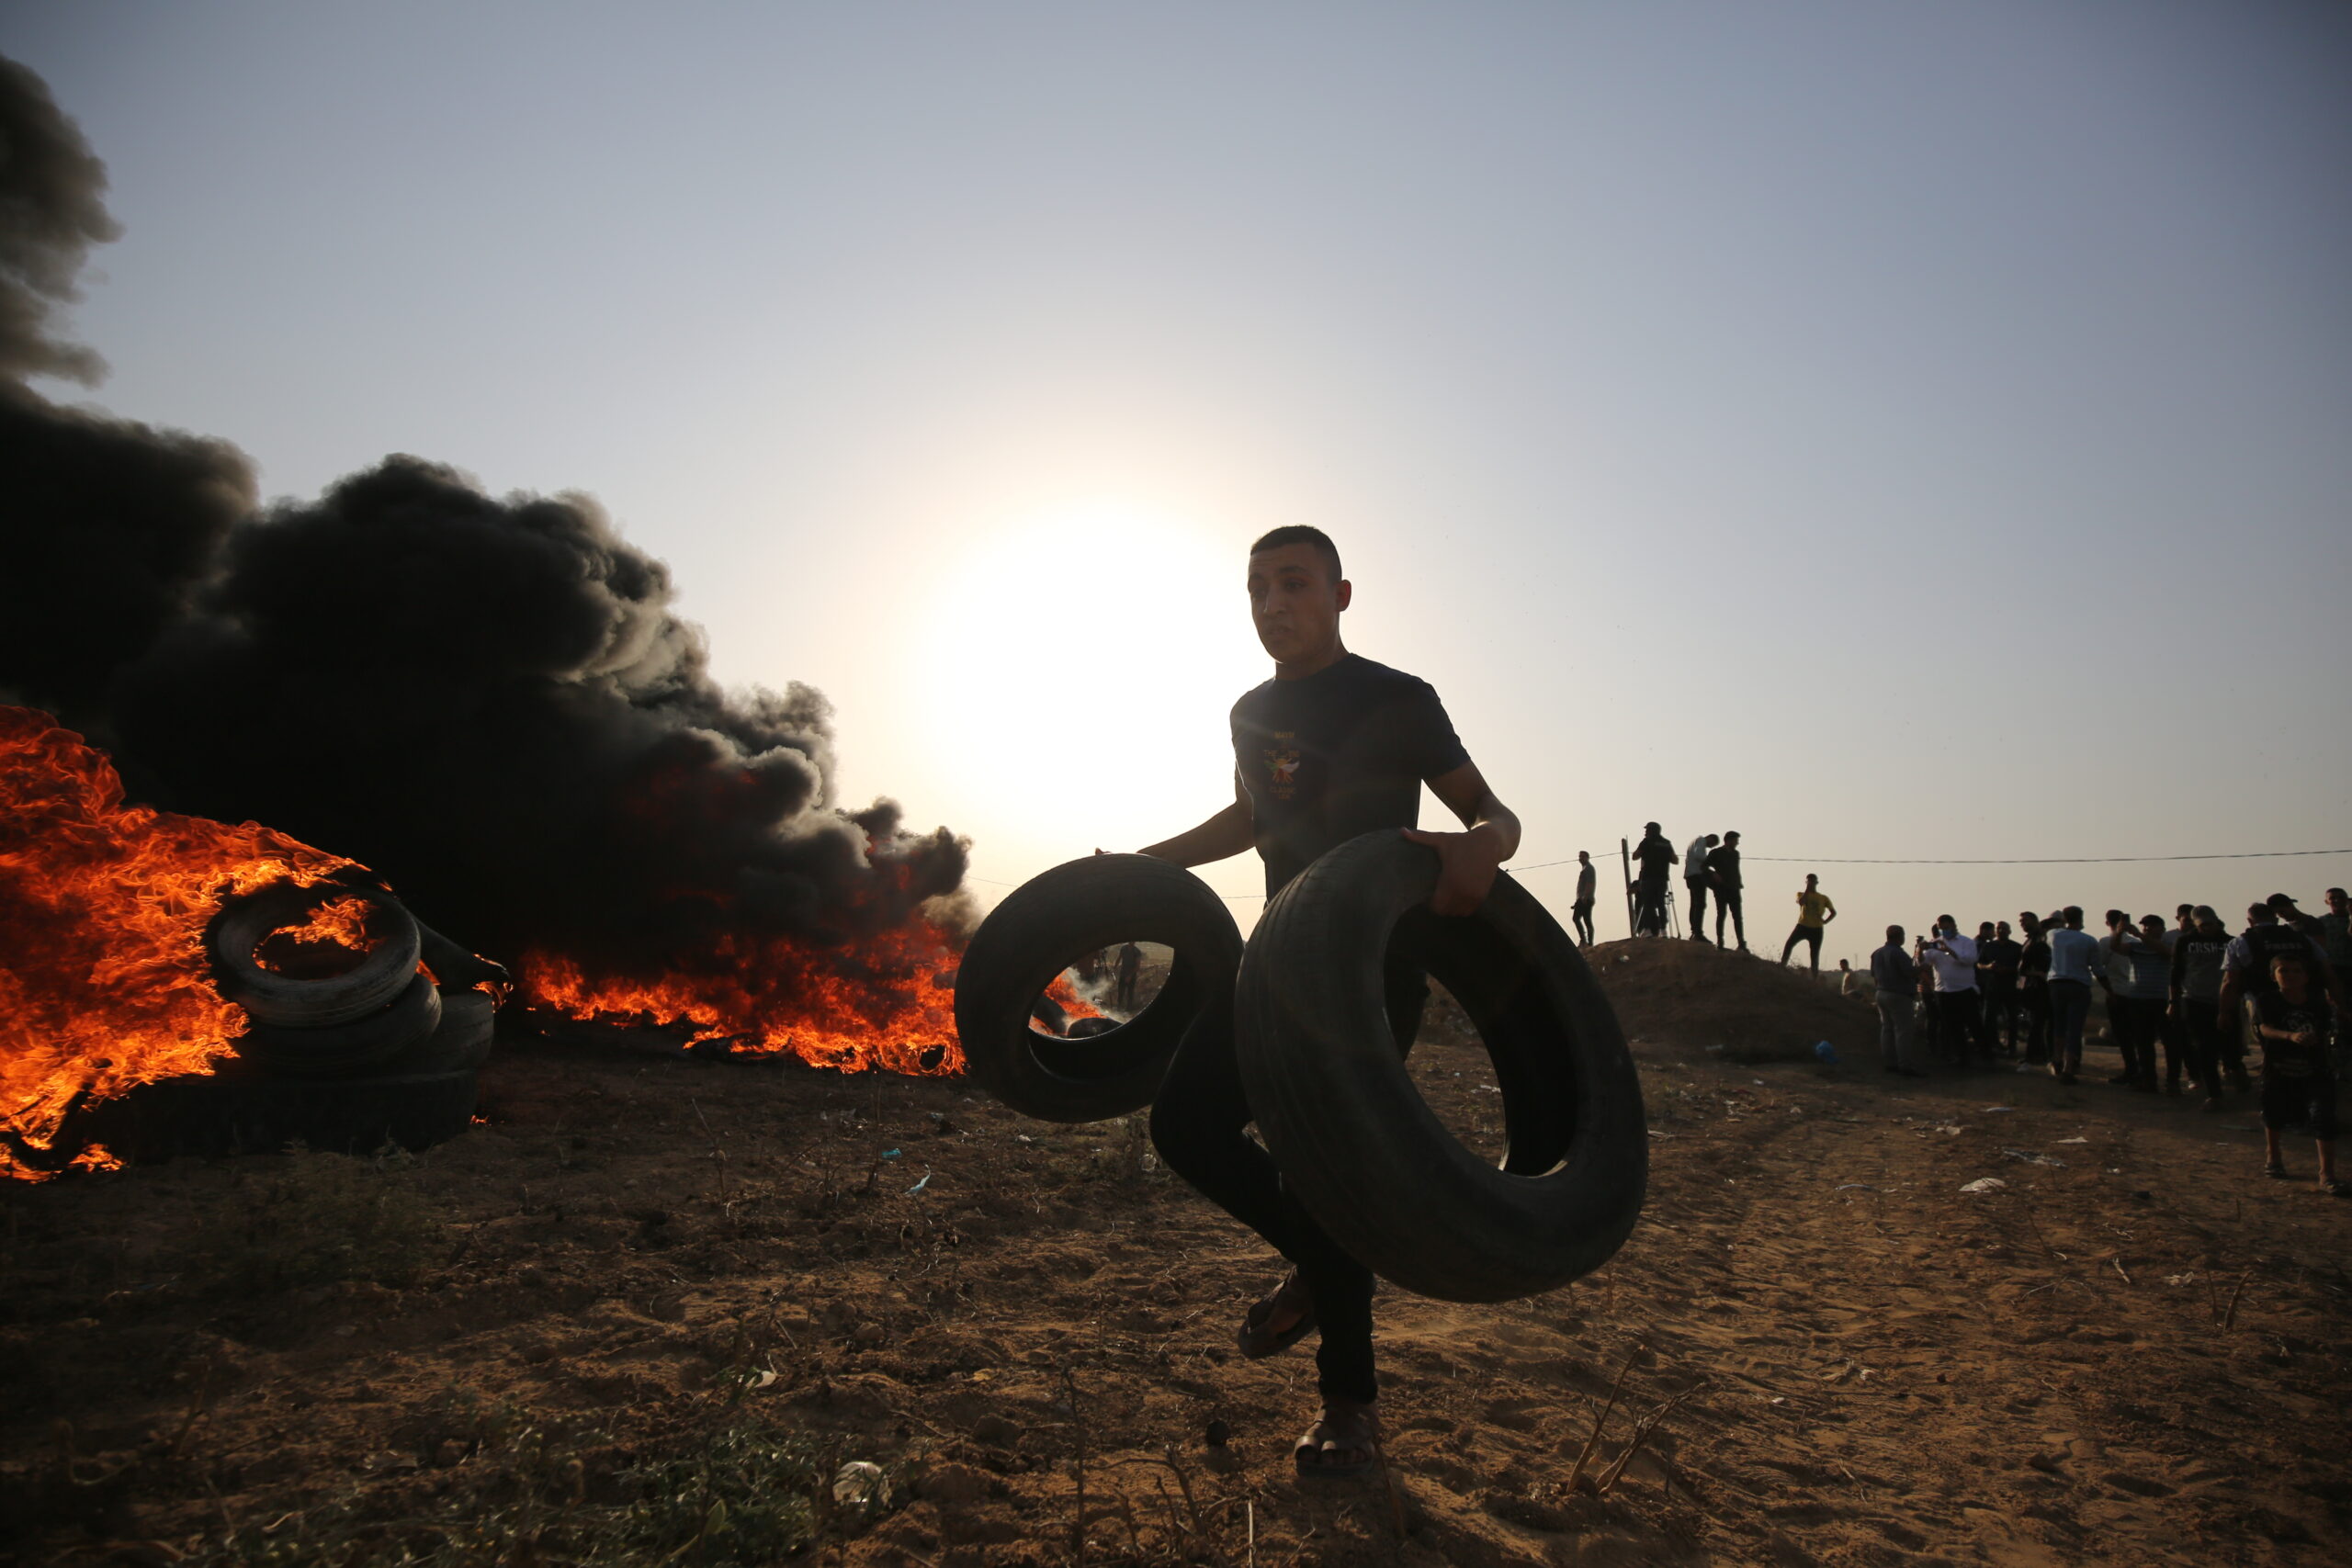 Palestinians protest at fence separating Gaza from Israel following Israel’s escalations and siege on Palestinian towns in the occupied West Bank [Mohammed Asad/Middle East Monitor]